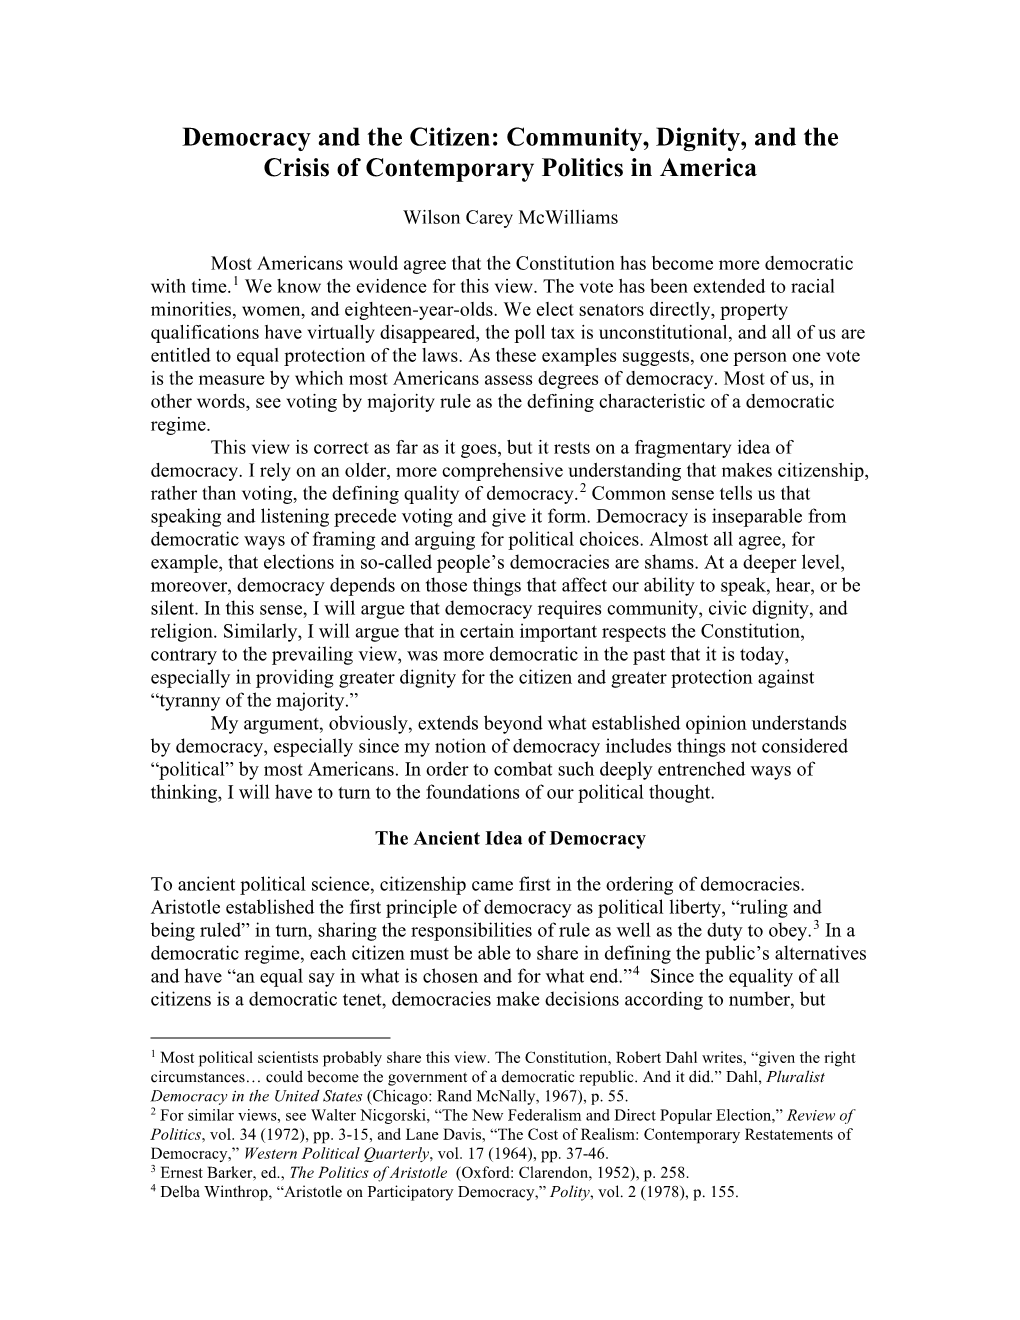 Democracy and the Citizen: Community, Dignity, and the Crisis of Contemporary Politics in America